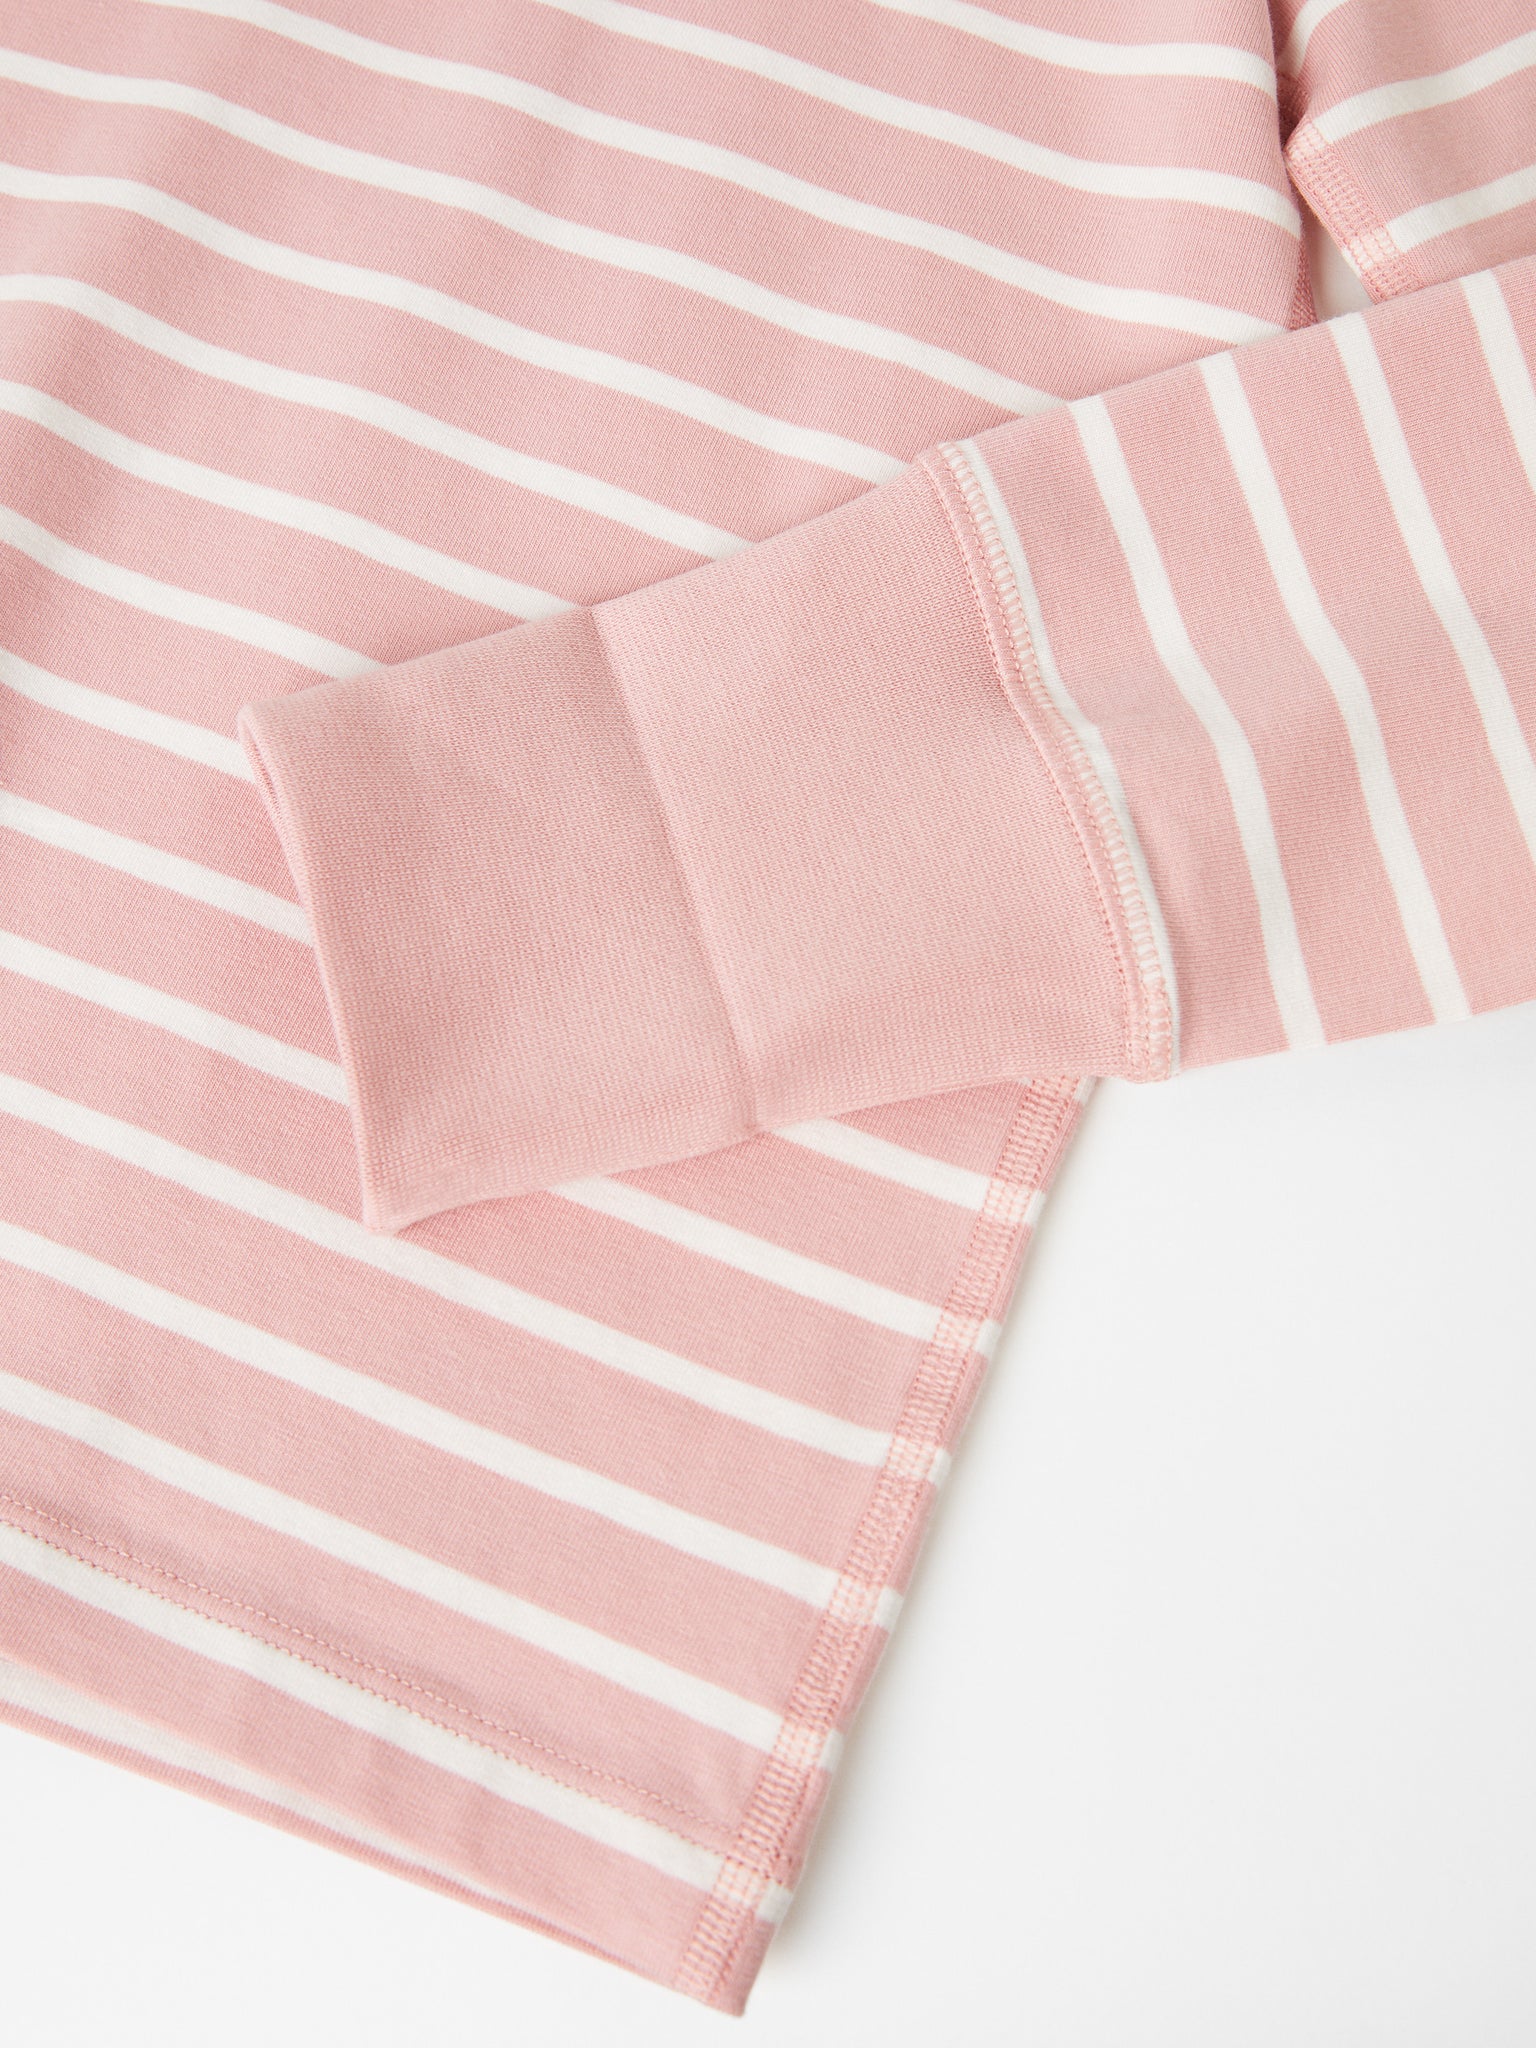 Organic Cotton Kids Pink Pyjamas from the Polarn O. Pyret kids collection. Clothes made using sustainably sourced materials.